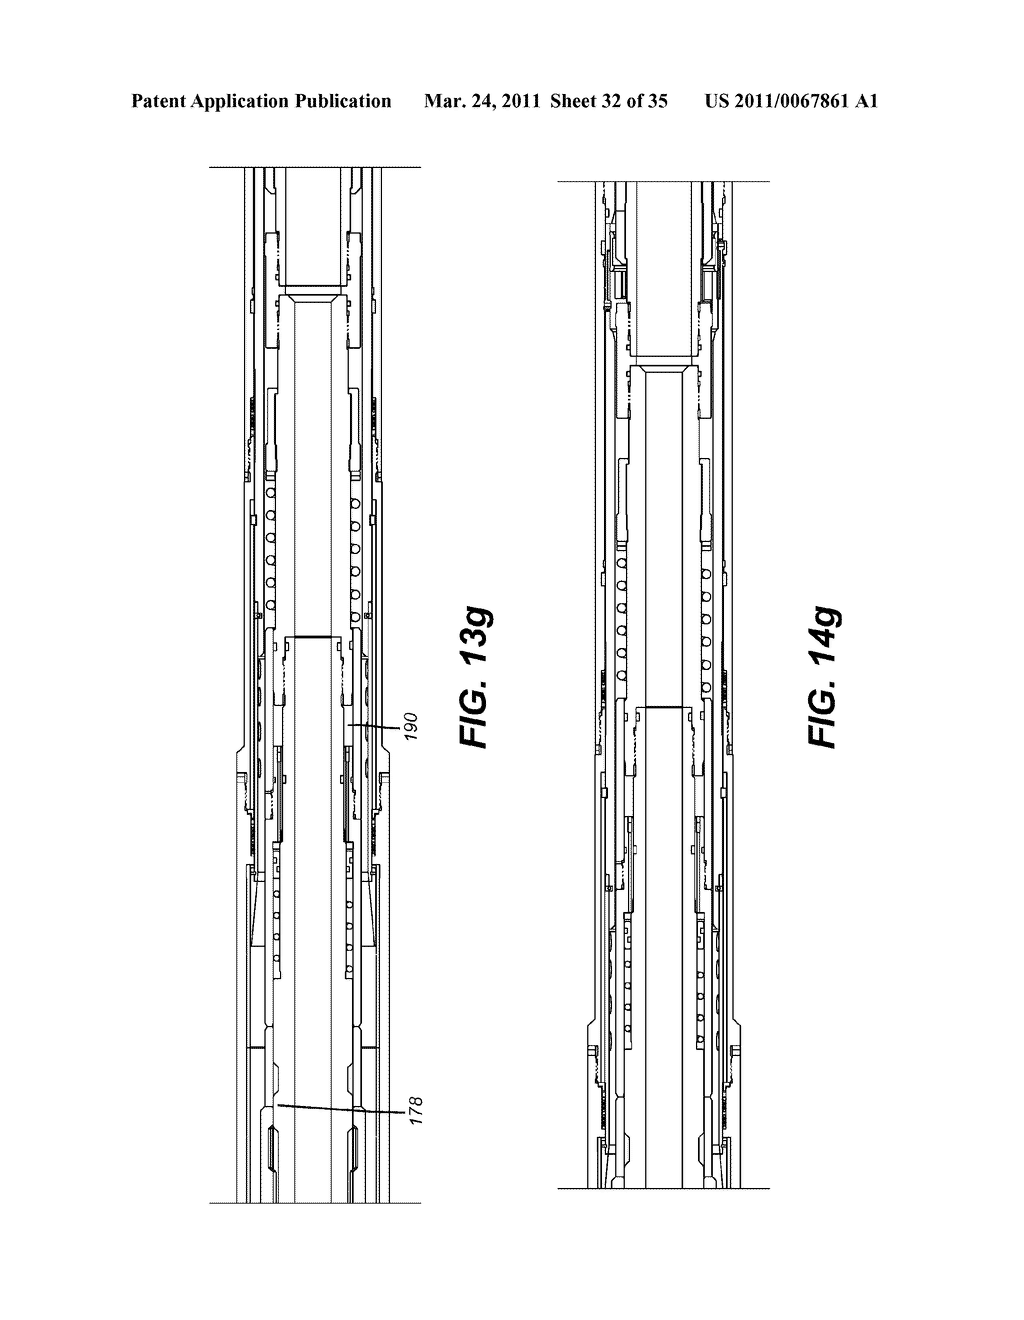 Fracturing and Gravel Packing Tool with Shifting Ability between Squeeze and Circulate while Supporting an Inner String Assembly in a Single Position - diagram, schematic, and image 33